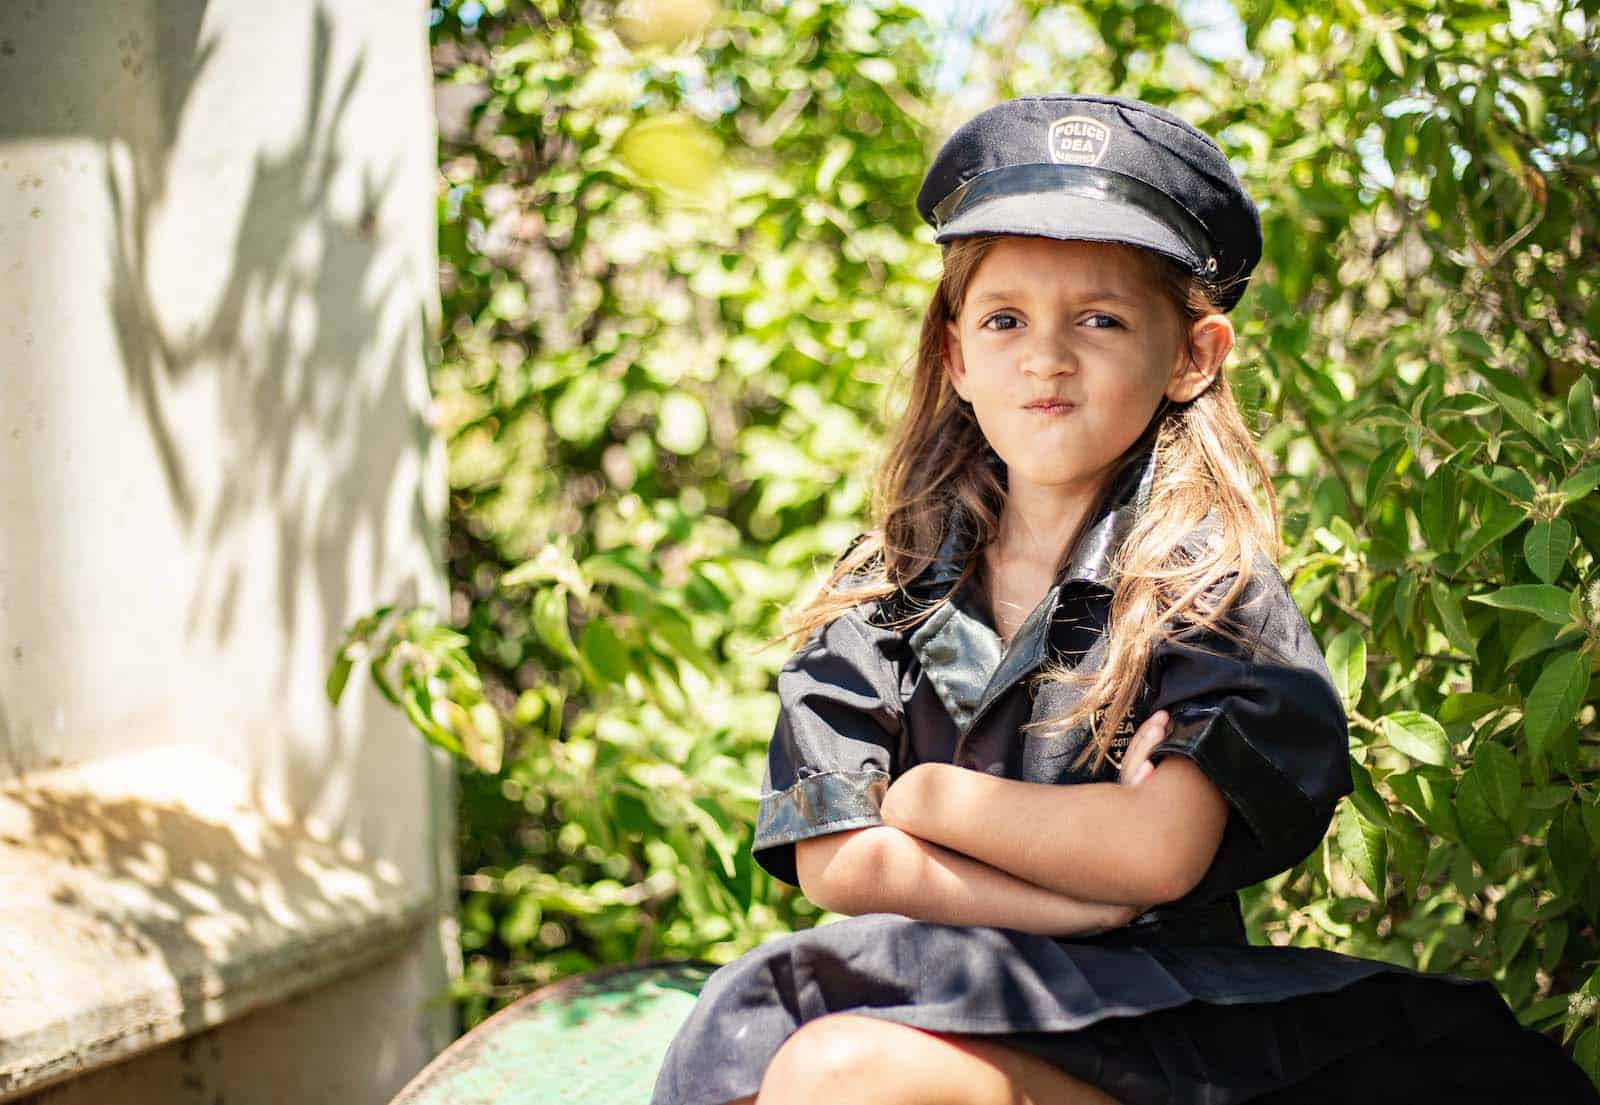 A young girl wearing a black police officer costume and cap crosses her arms in front of her, while sitting in front of a bush. Her lips are pursed in a funny face. 